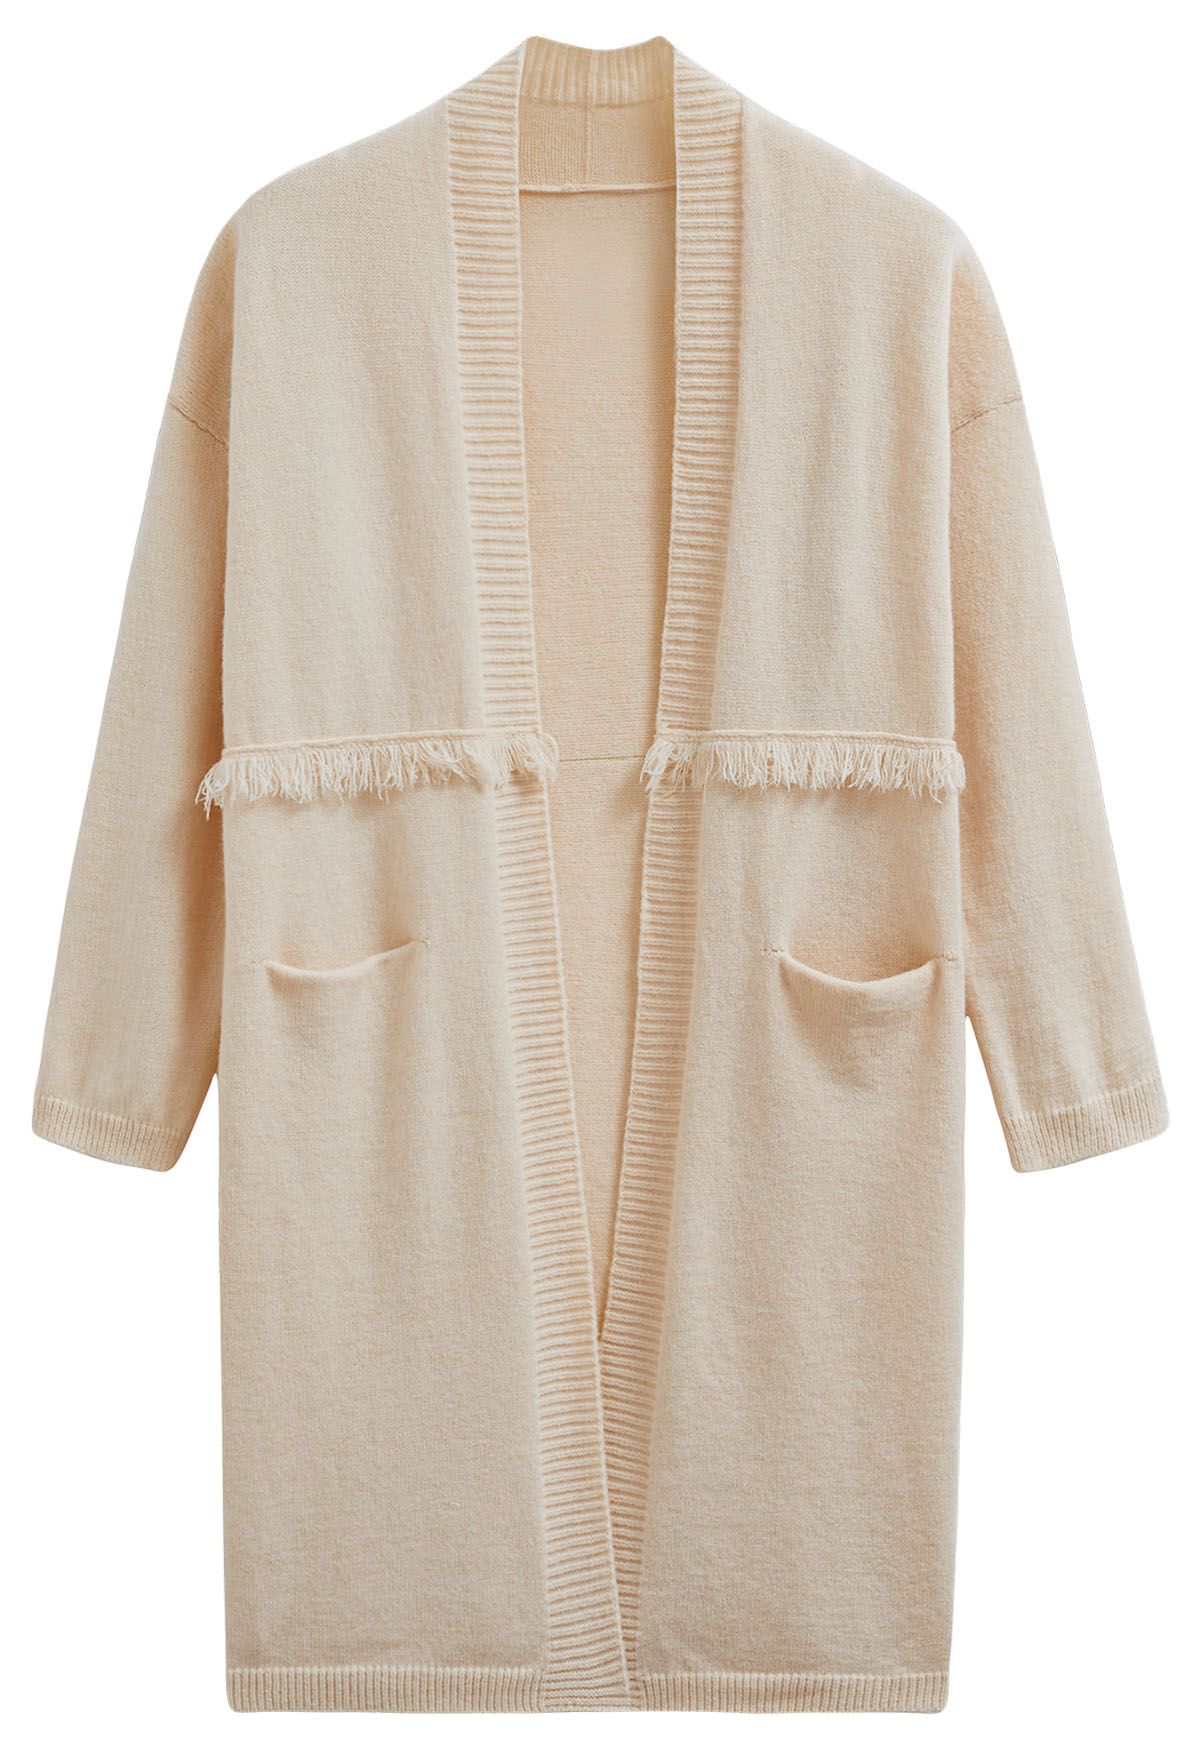 Open Front Fringed Waist Knit Cardigan in Cream